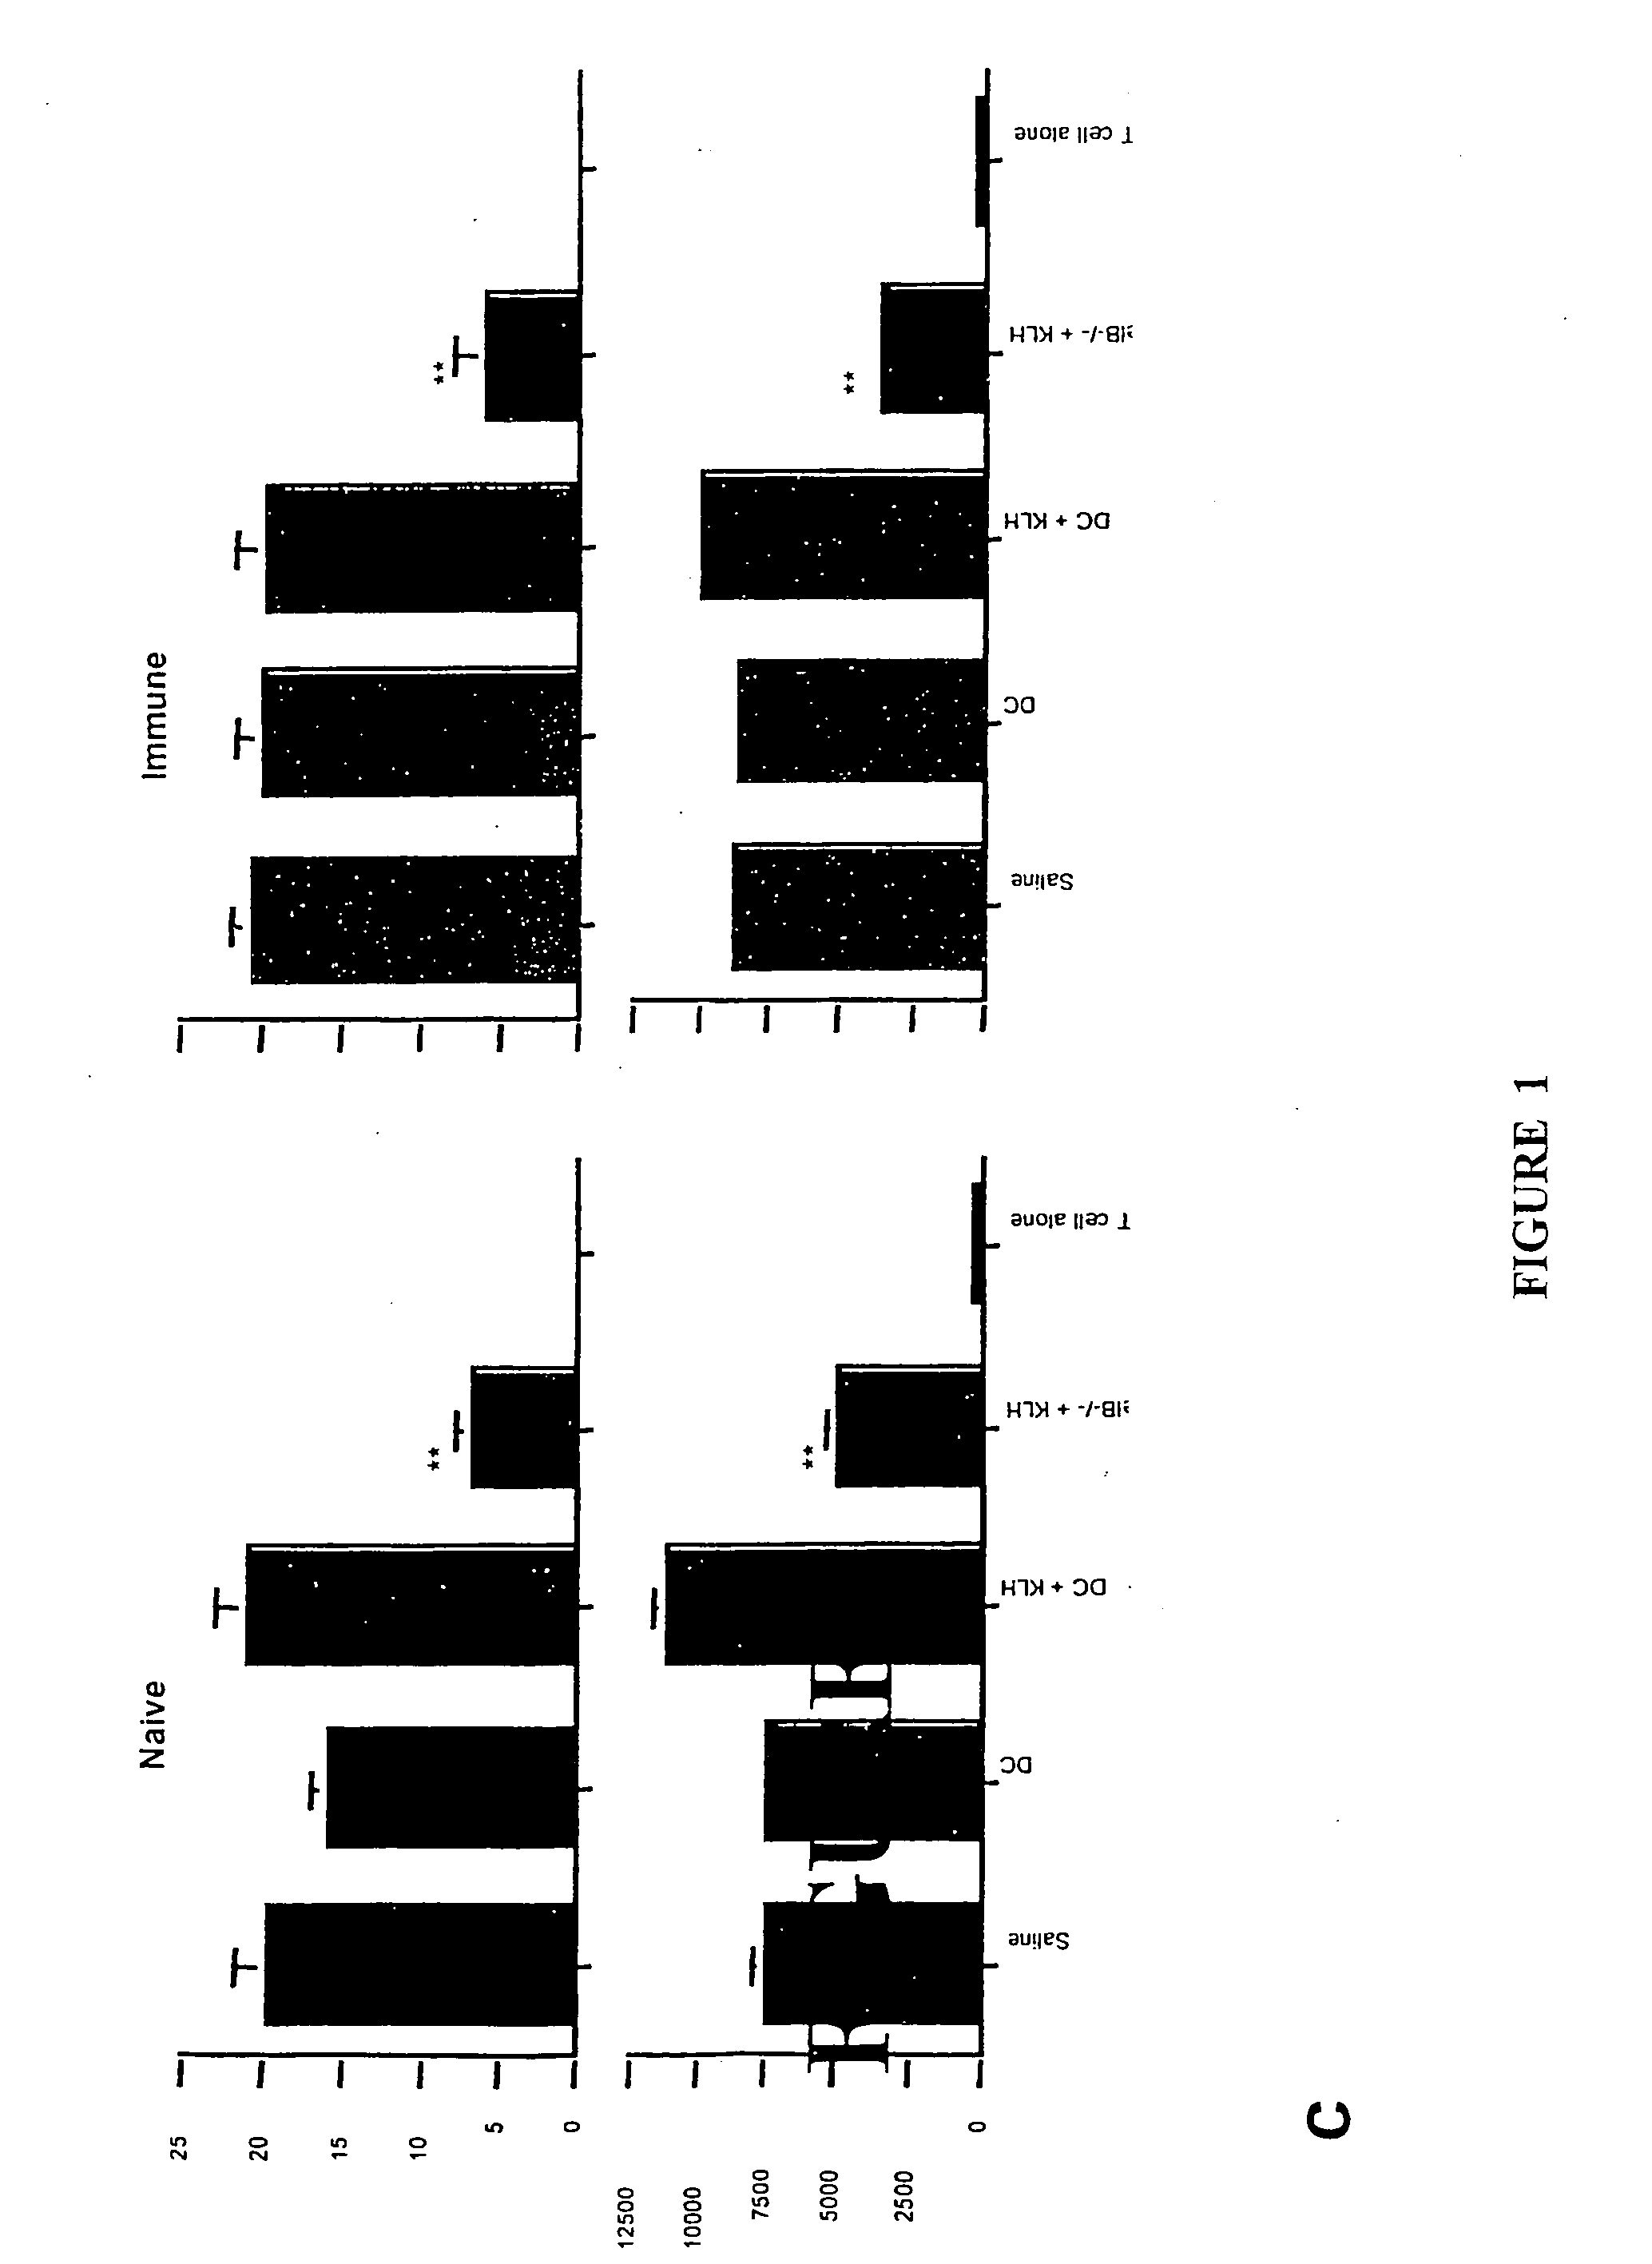 Immunomodulating compositions, processes for their production and uses therefor